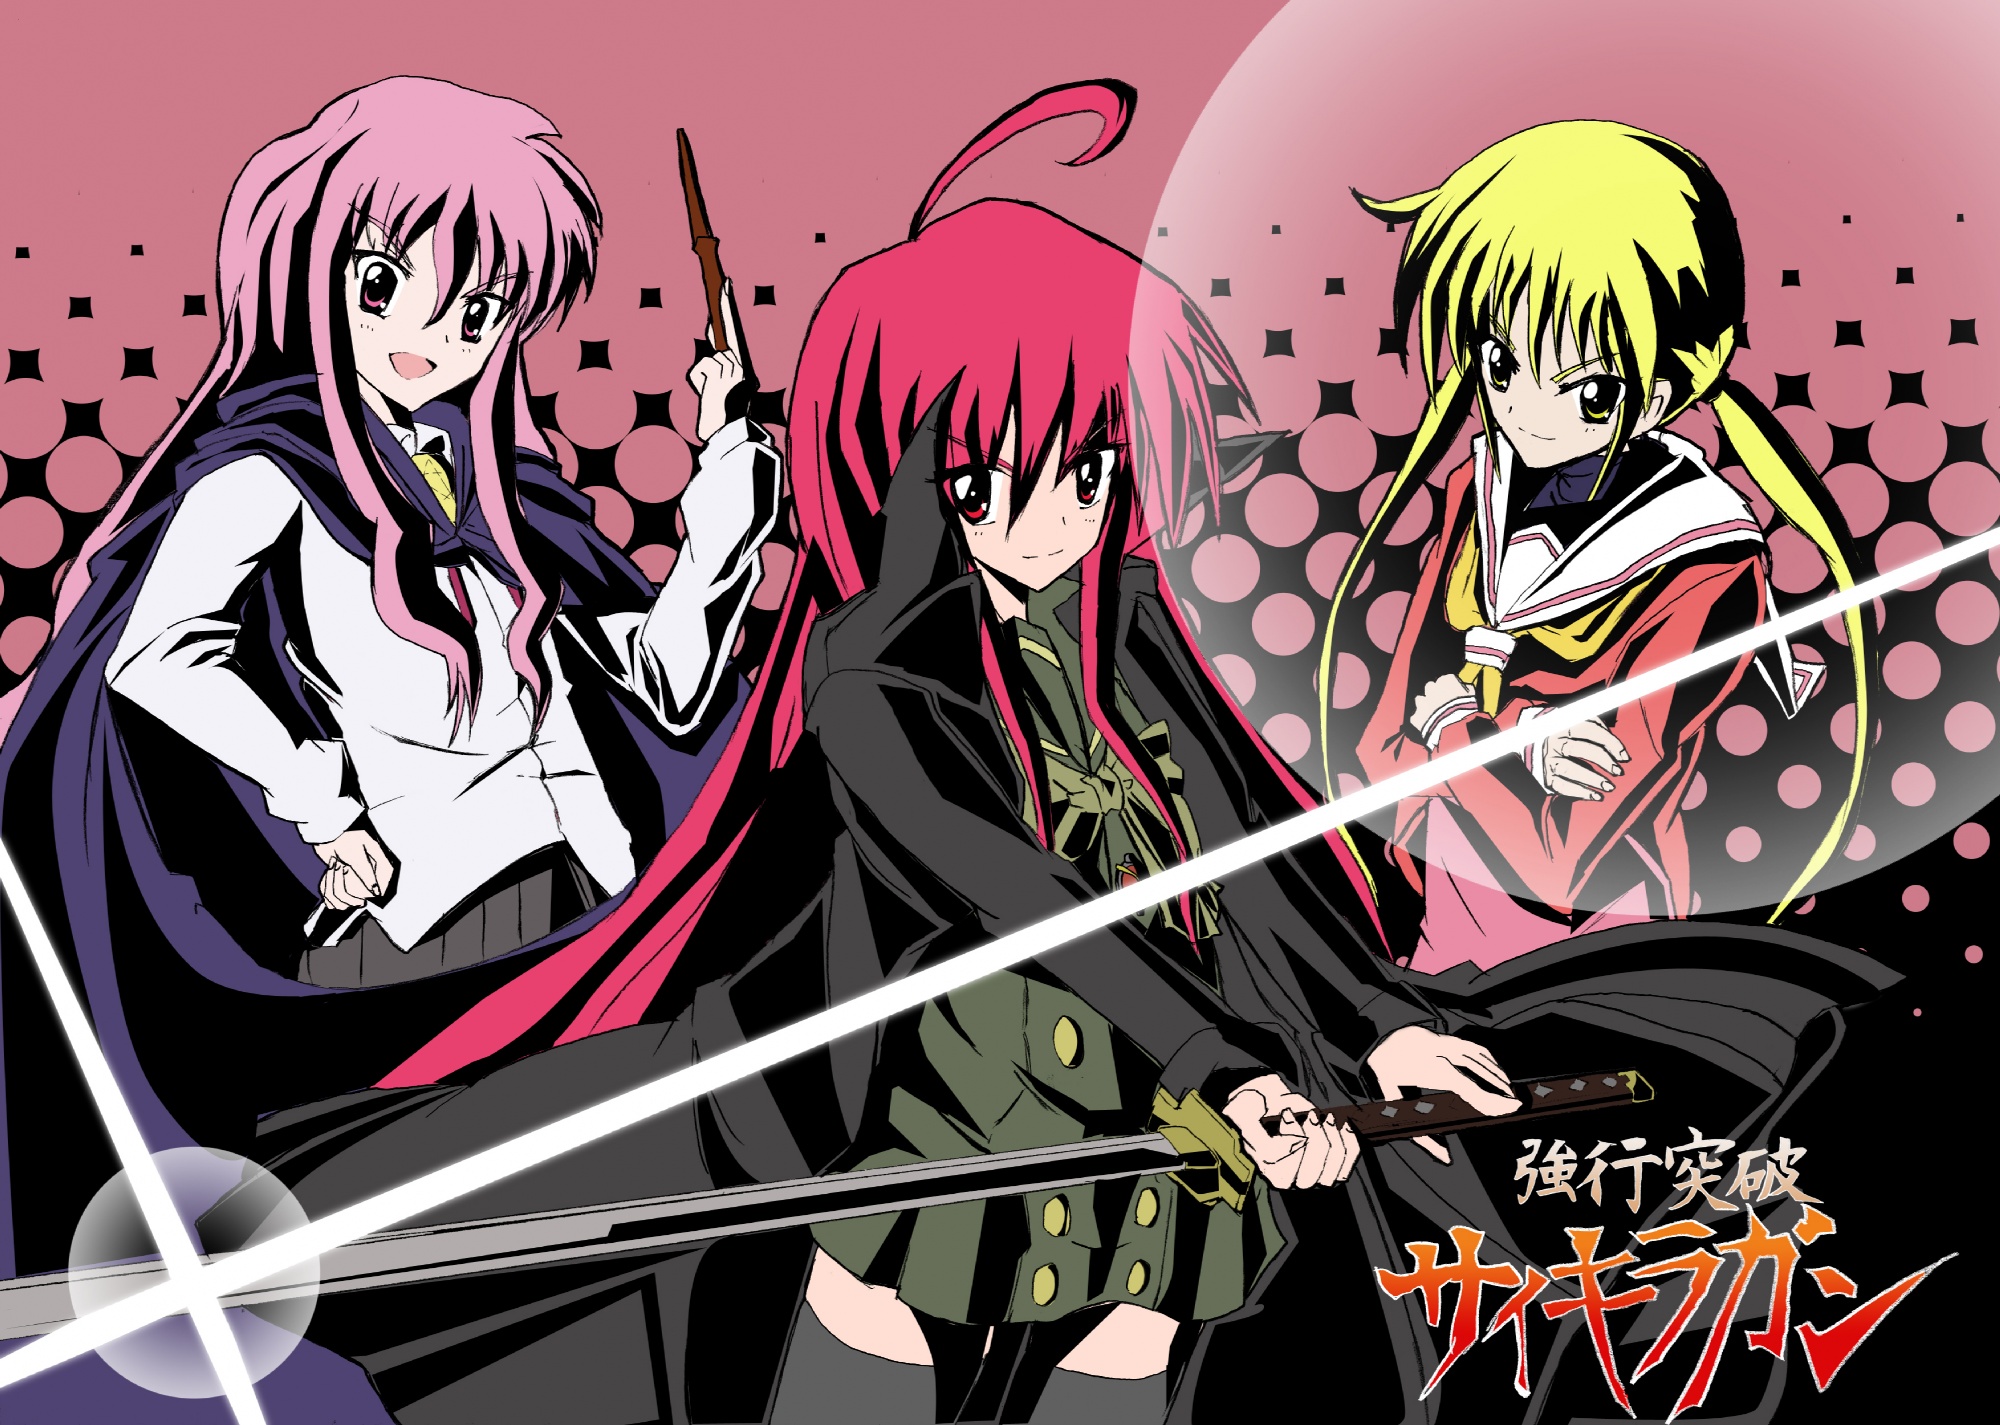 Anime girl with flaming red hair and sword, surrounded by characters from other anime series in a vibrant crossover.